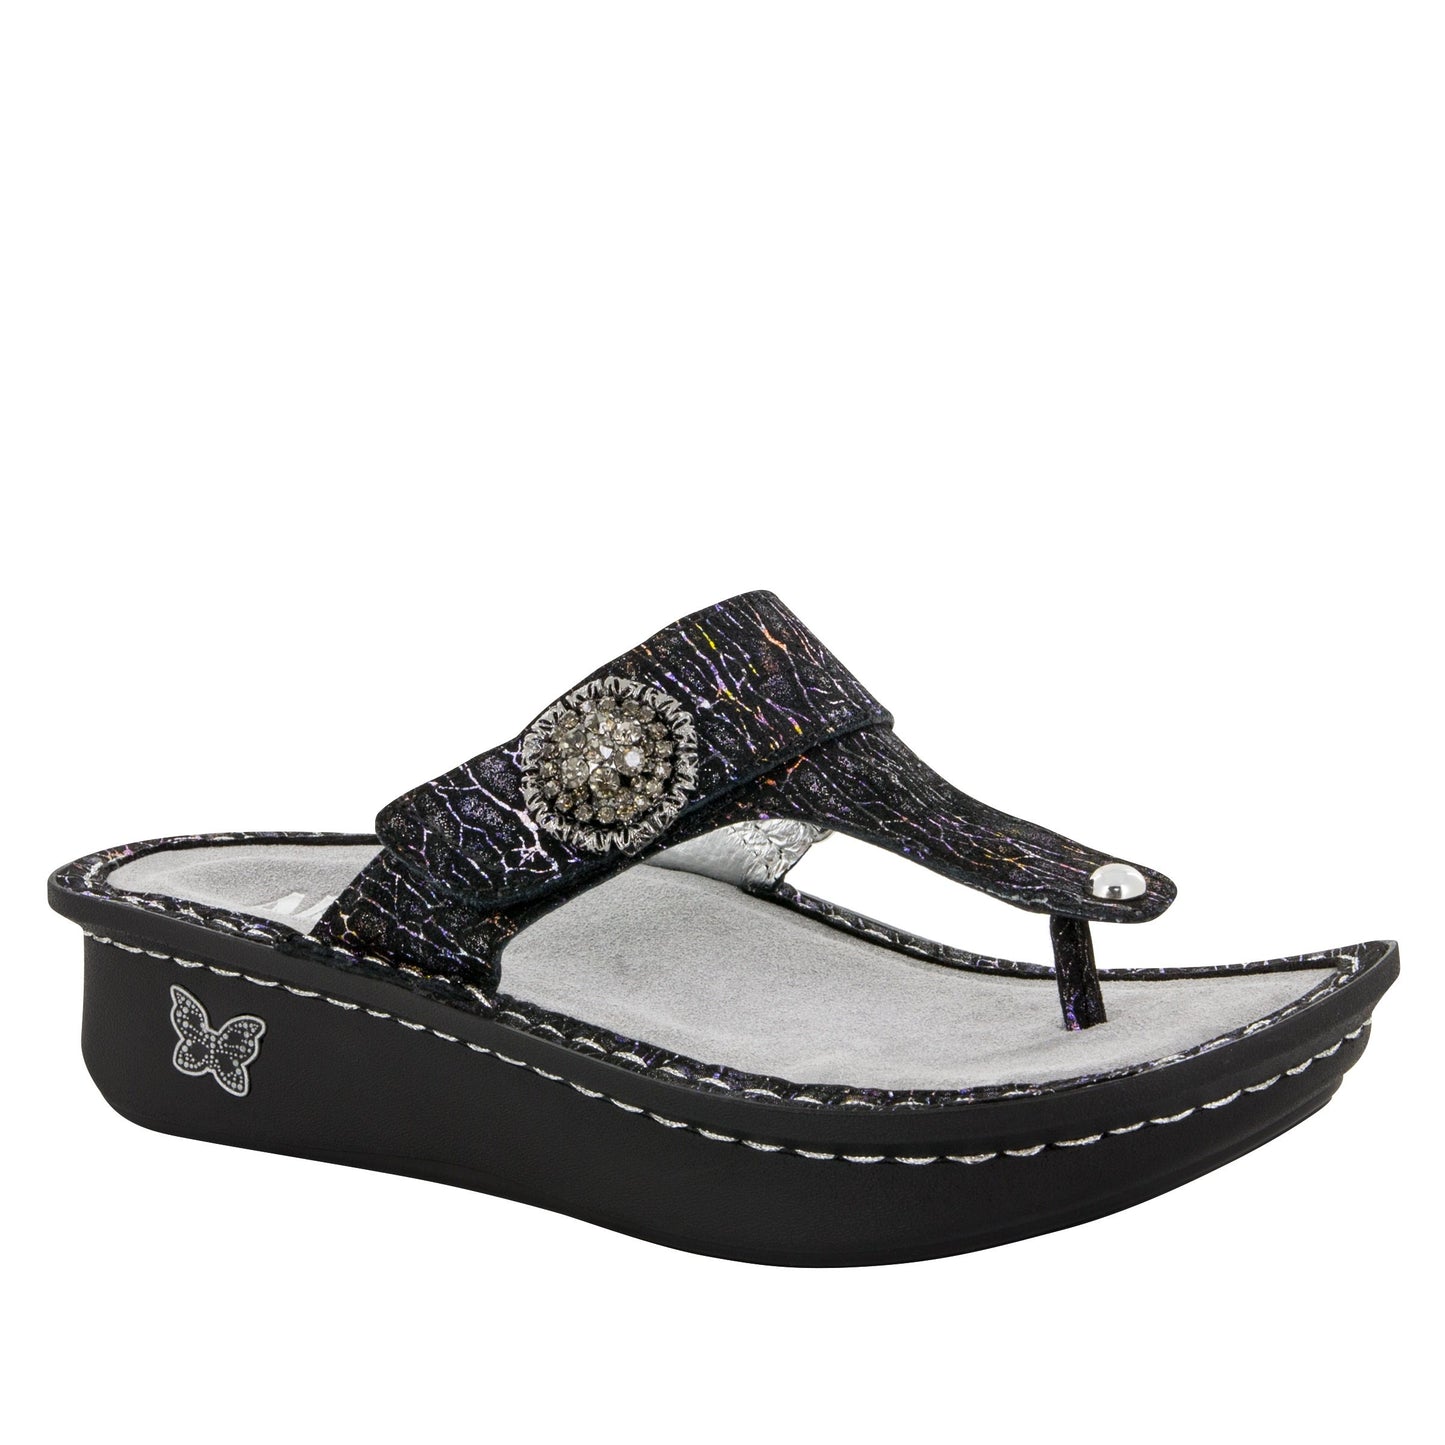 Alegria  Sale Shoe Size 36 Carina Leather Thong Sandal in Totally Cellular at Parker's Clothing and Shoes.